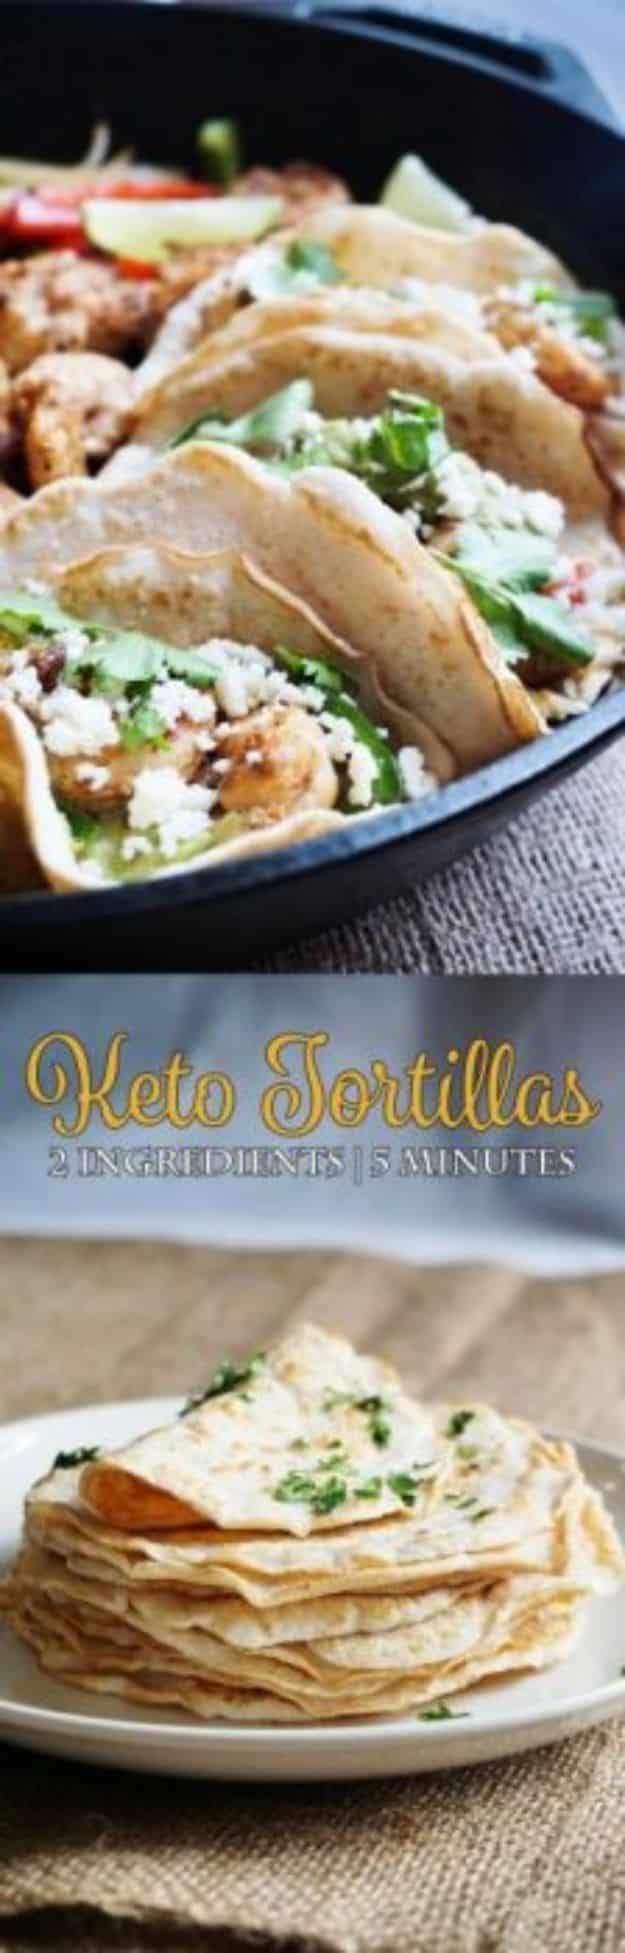 Best Keto Recipes - Low Carb Tortillas - Easy Ketogenic Recipe Ideas for Breakfast, Lunch, Dinner, Snack and Dessert - Quick Crockpot Meals, Fat Bombs, Gluten Free and Low Carb Foods To Make For The Keto Diet #keto #ketorecipes #ketodiet